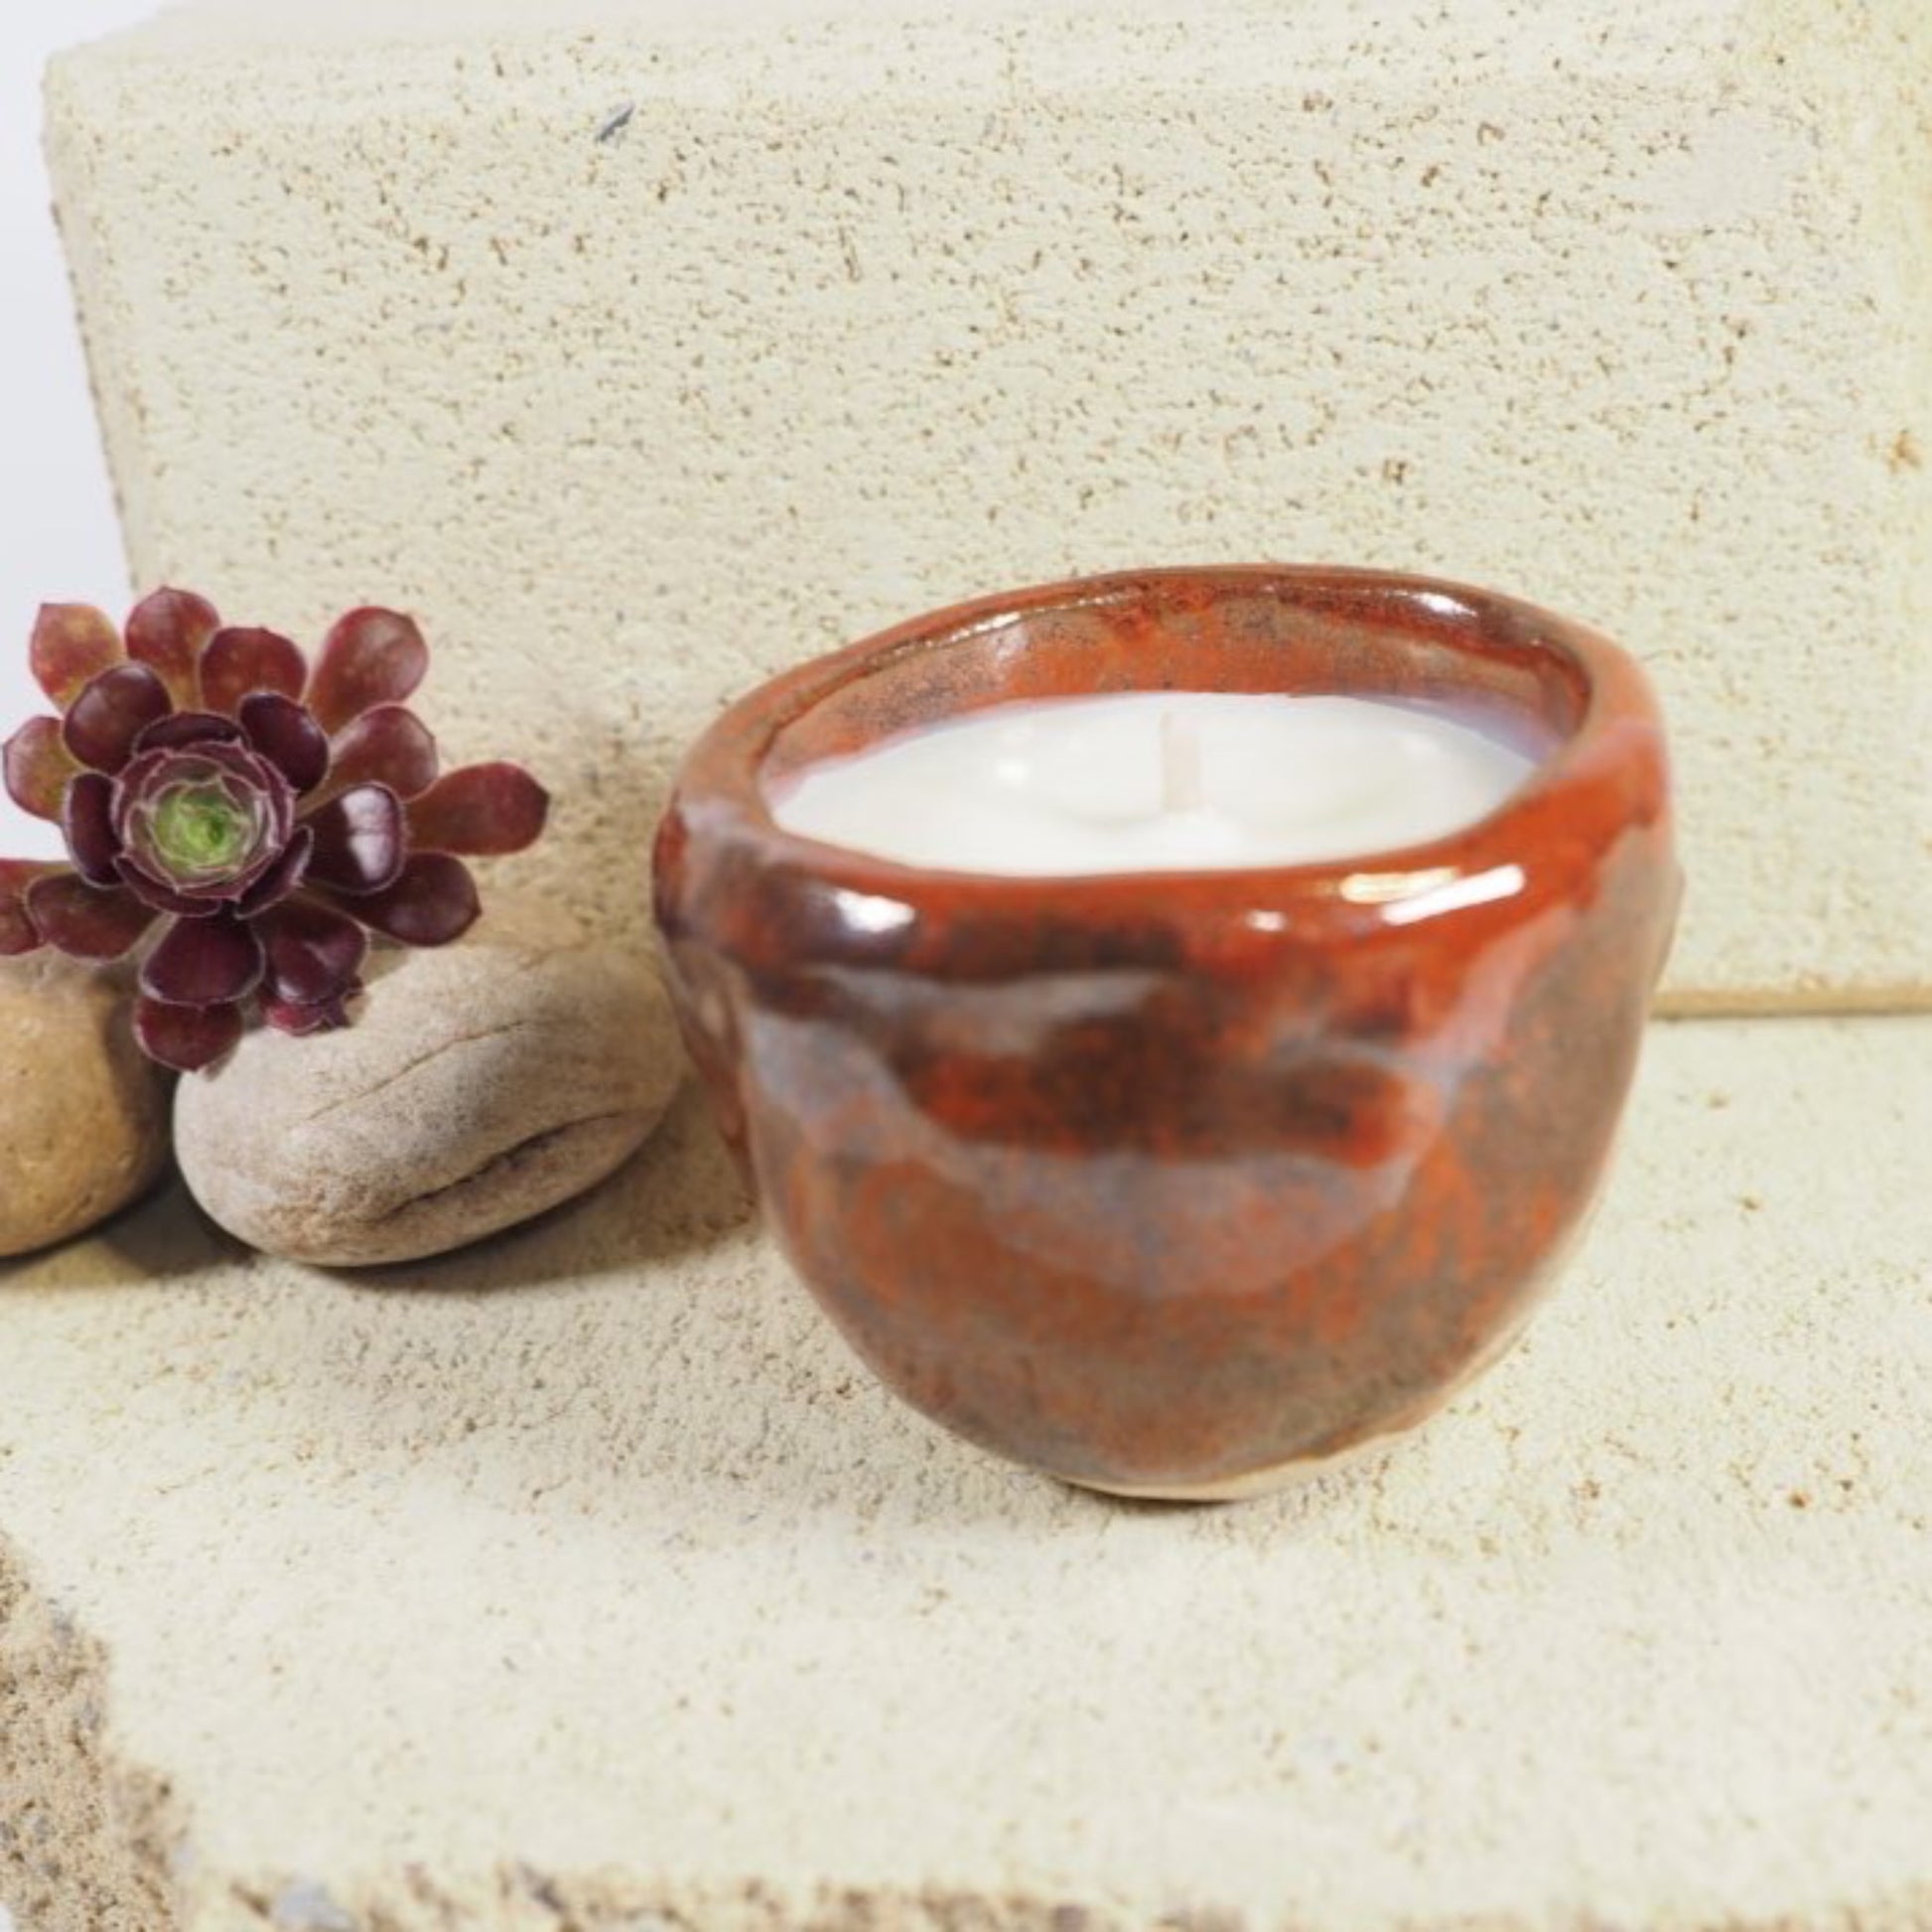 Ceramic candle pot in tomato red glaze filled with coconut and soy wax